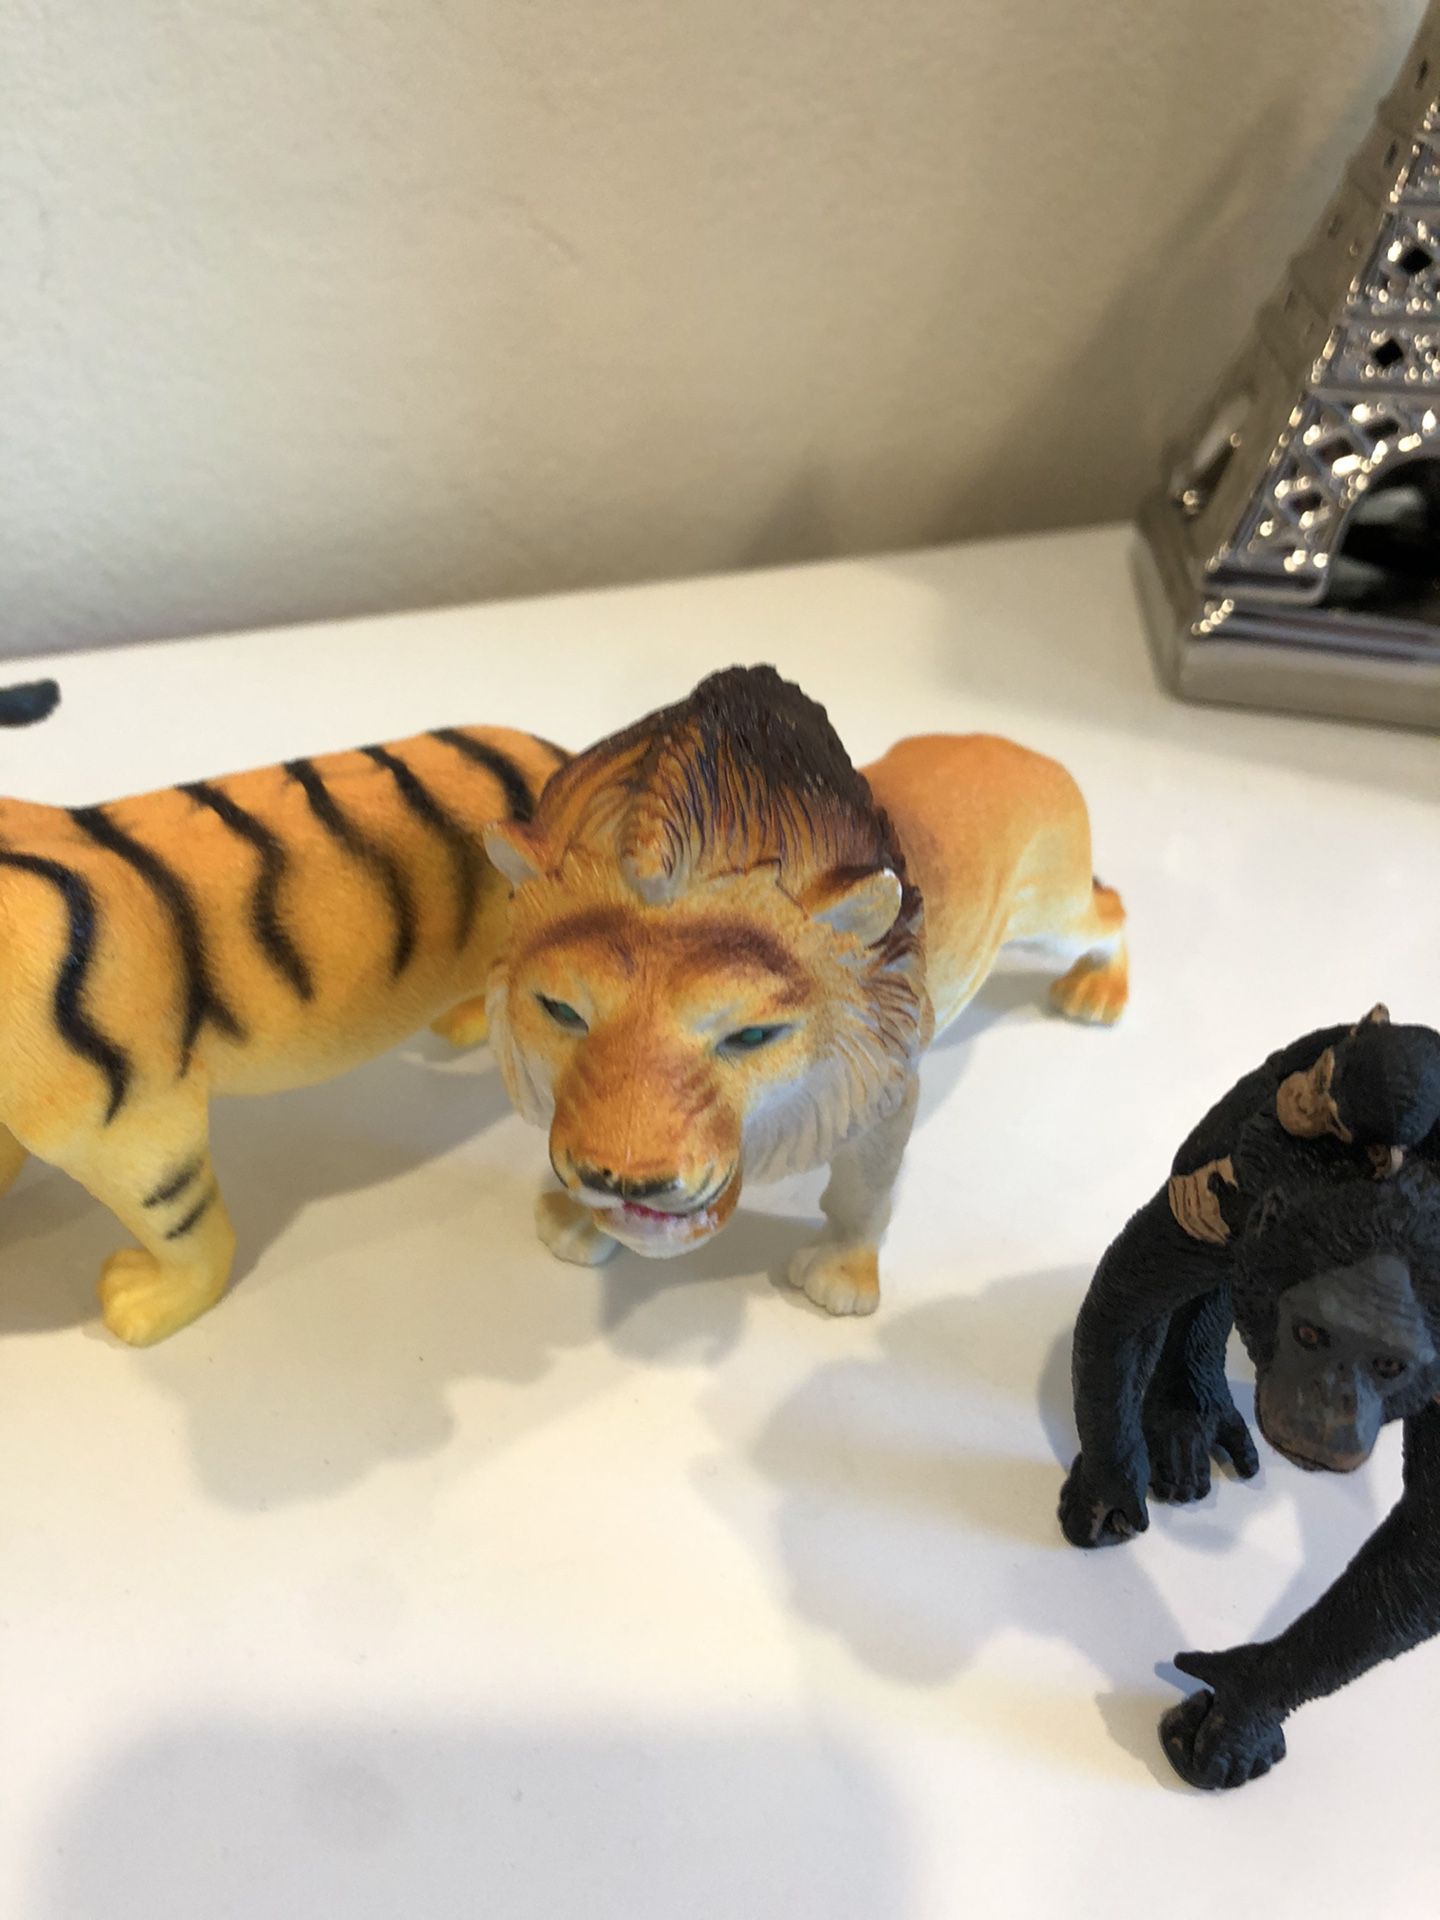 A lot of medium size zoo animals zebra, hippo, tiger, lion, monkeys toys $10 for all